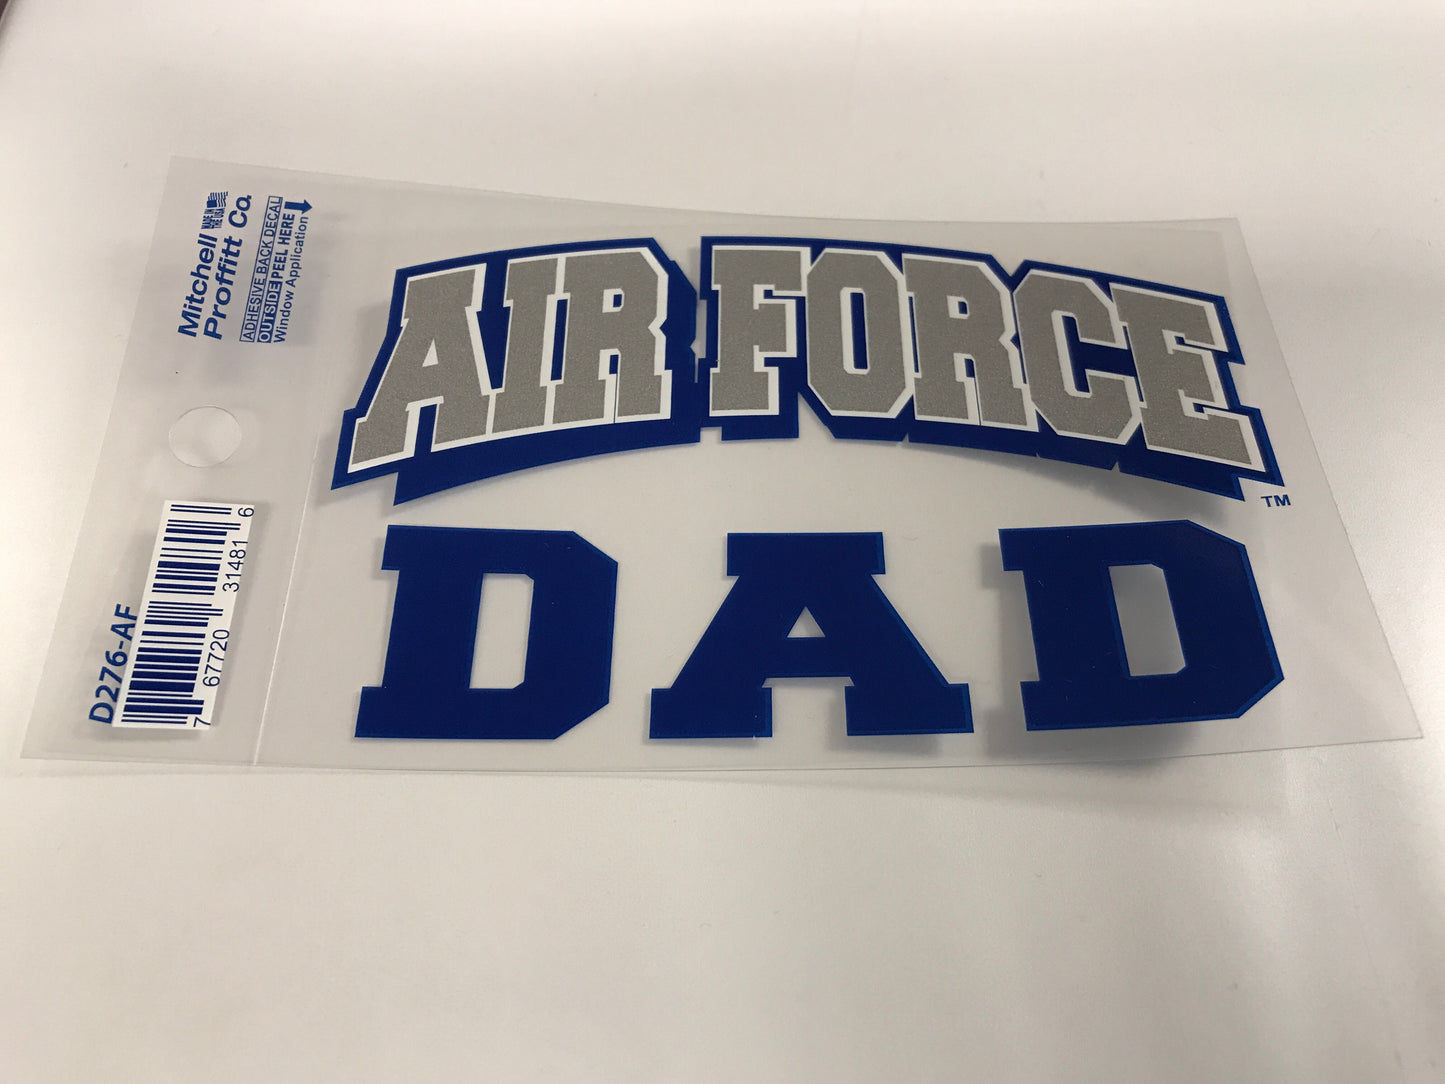 Air Force Dad Decal